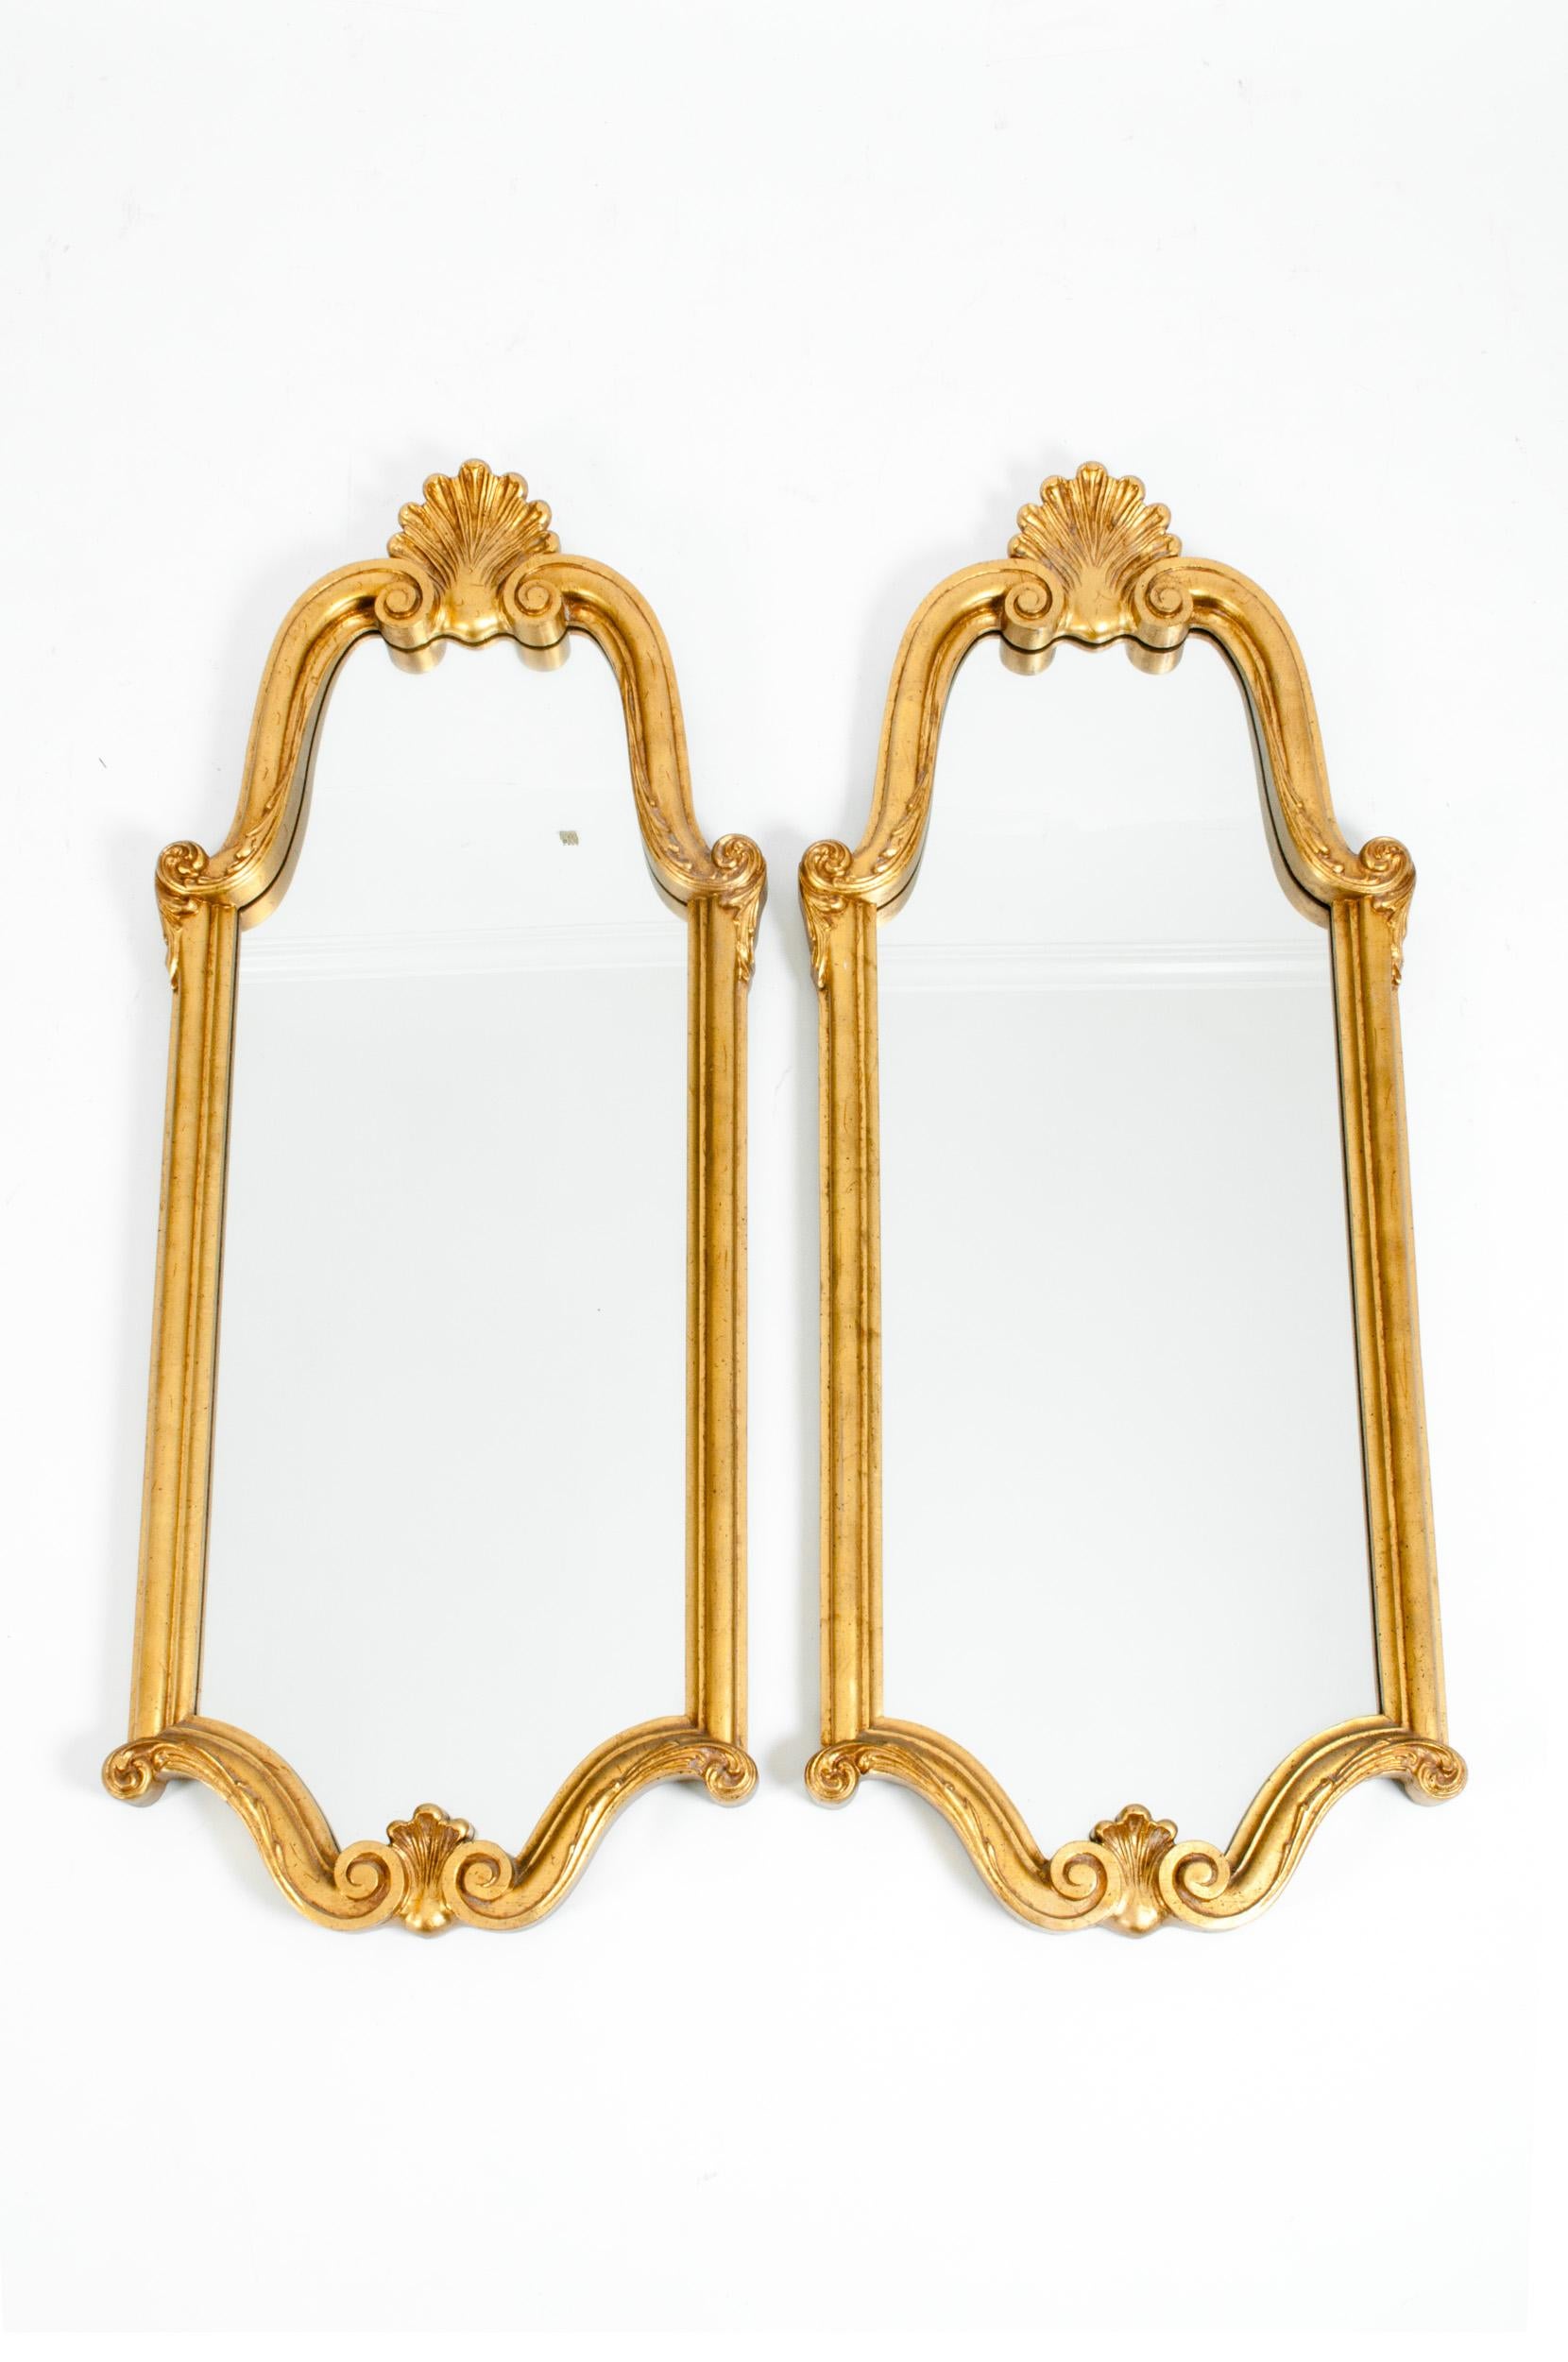 Late 19th century giltwood frame matching pair hanging wall mirror with arched top design details. Each mirror is in great condition with appropriate wear consistent to age / use. Each mirror measure about 48.5 inches length x 19.5 inches wide.